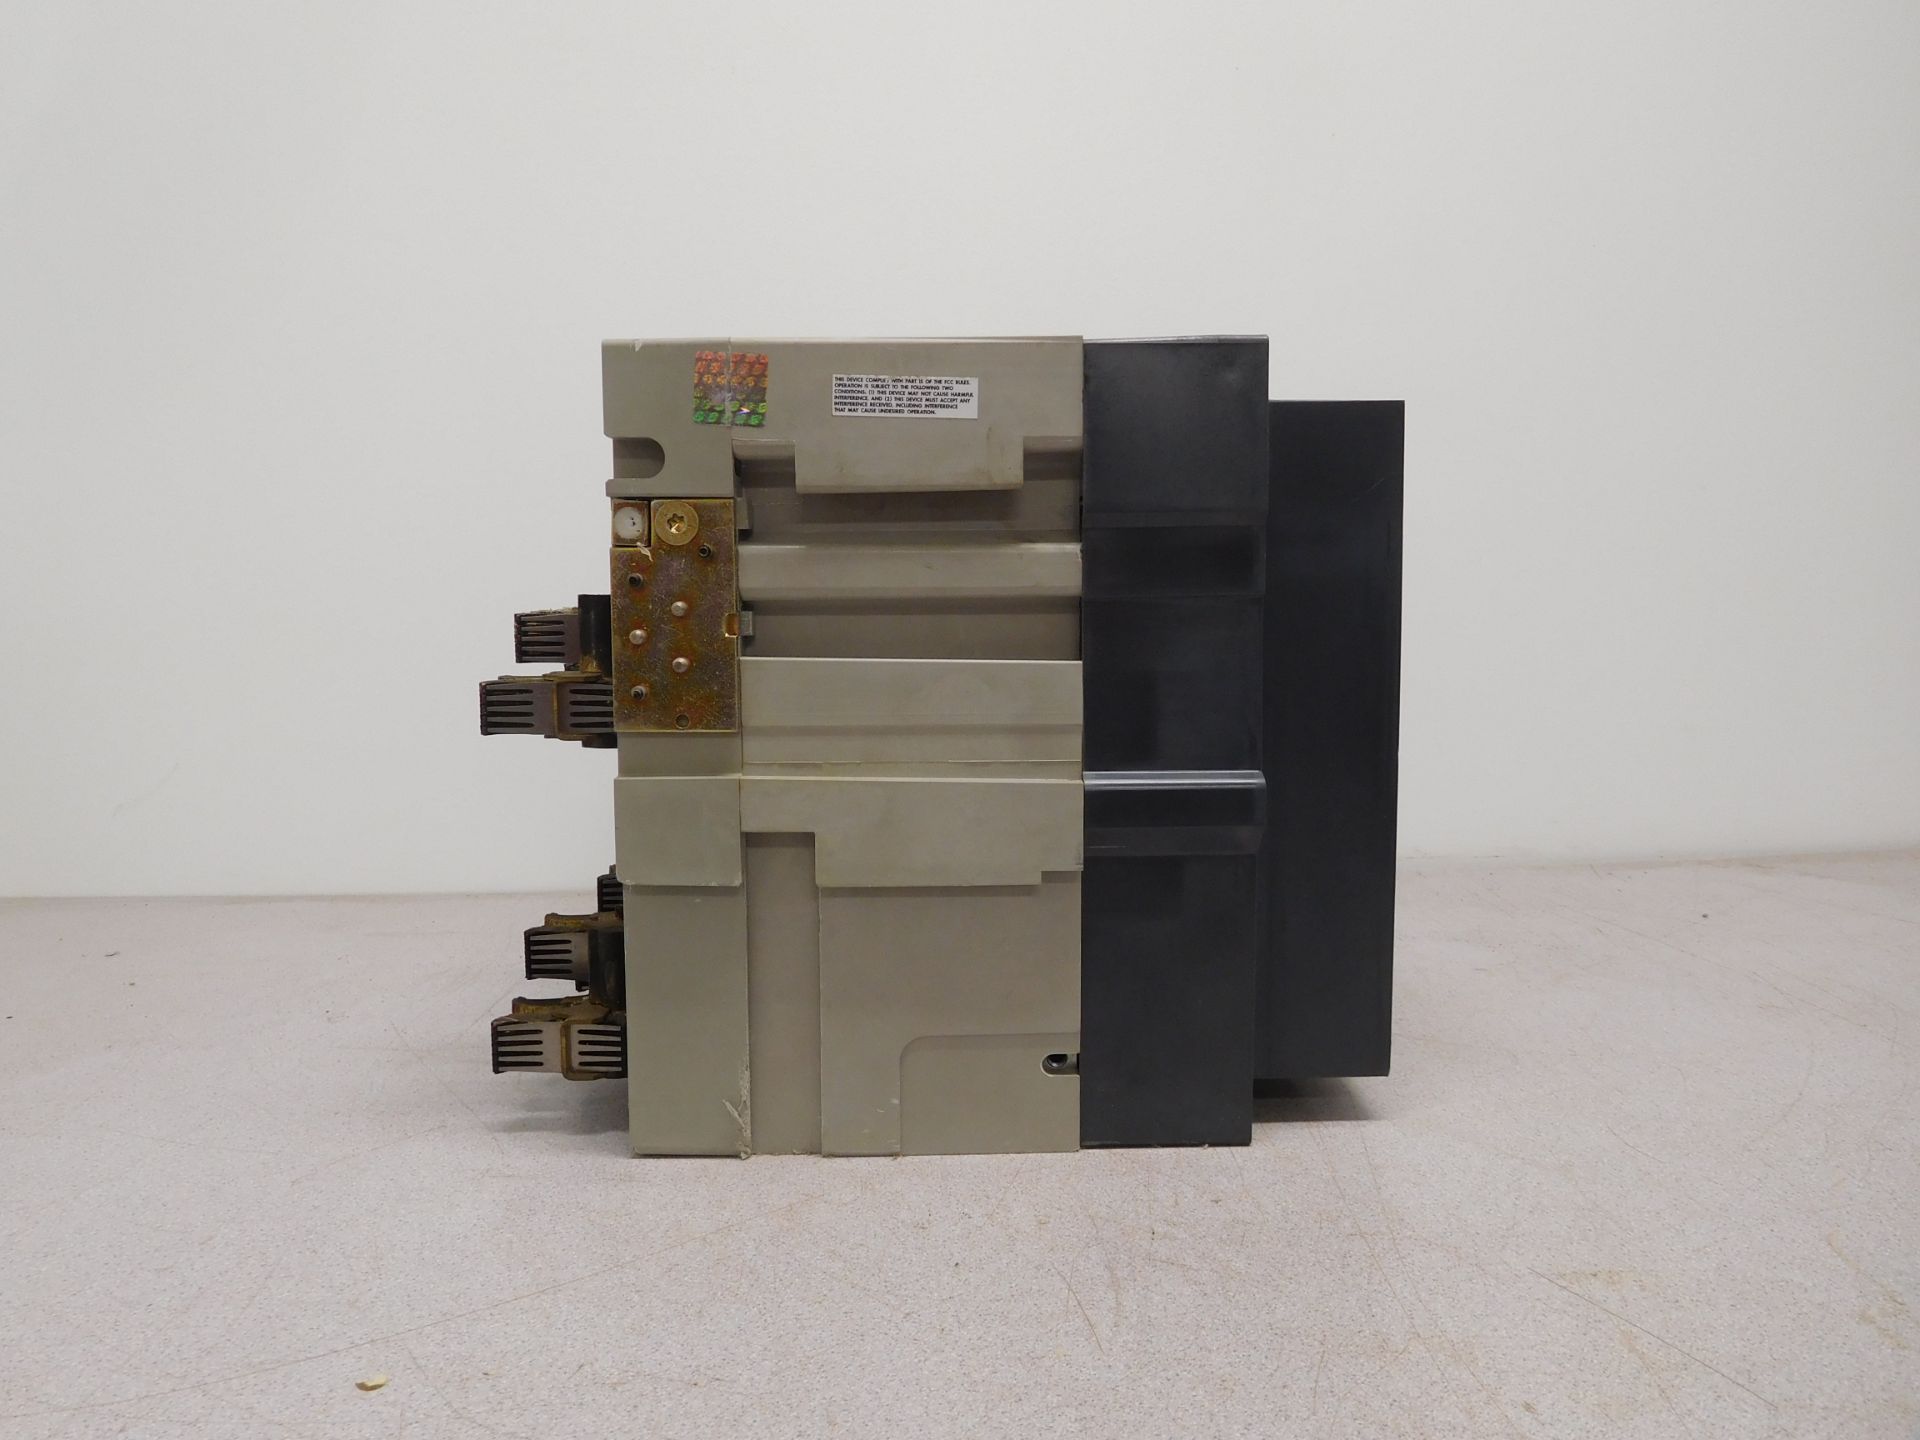 Square D NW 08 H1 Masterpact 800 Amp Low-Voltage Power Circuit Breaker - Image 7 of 7